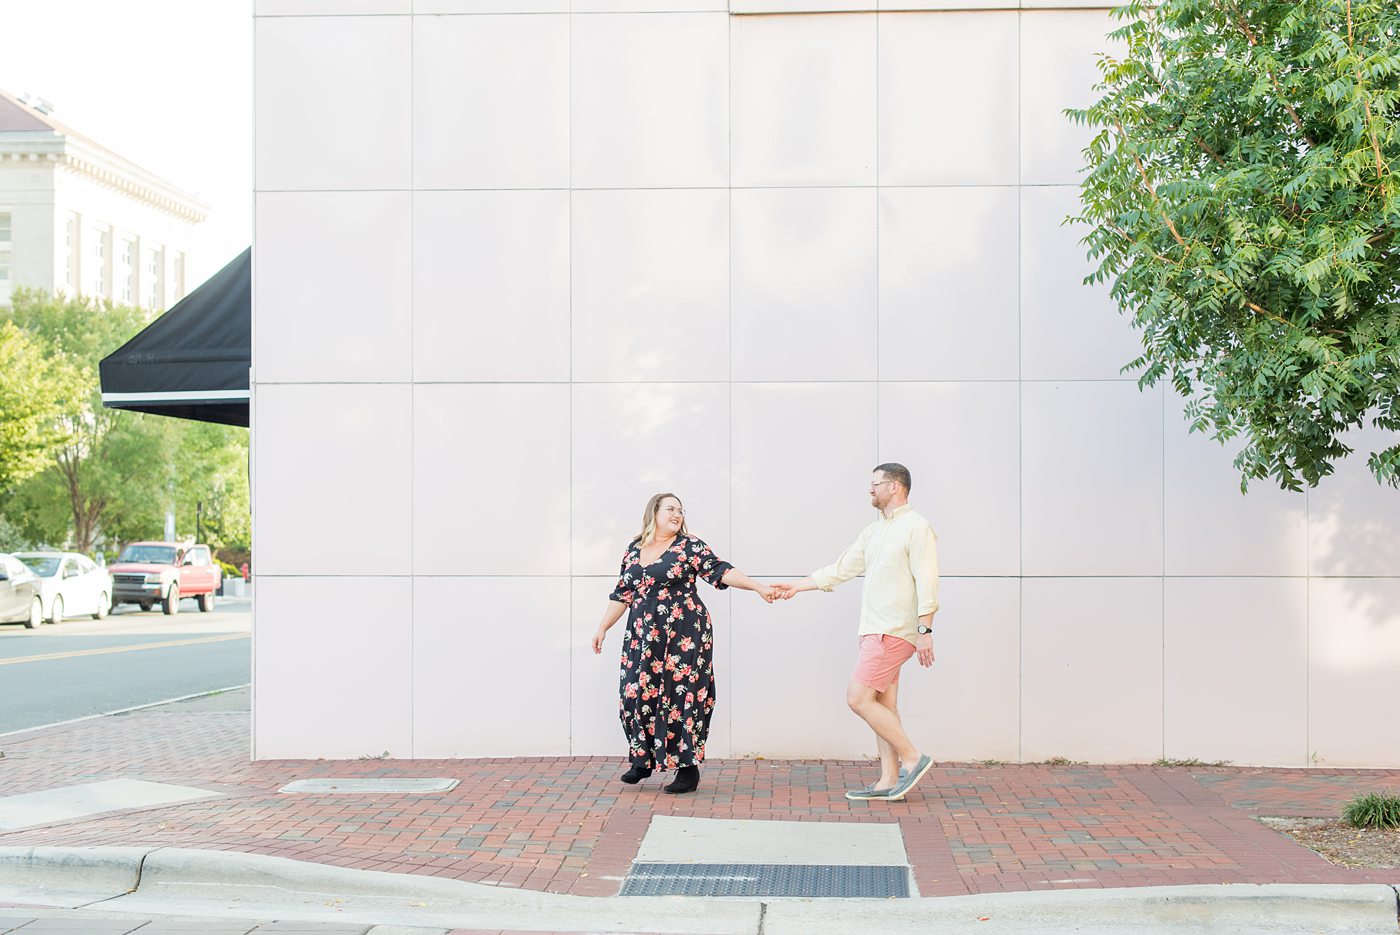 Durham North Carolina wedding photographer, Mikkel Paige Photography, captures engagement-like photos for a couple in the downtown area of this NC city for a two year anniversary couples session with Nikki and her husband, Jason, of Fancy This Photography. #mikkelpaige #DurhamEngagementPhotos #durhamphotographysession #DowntownDurham #DurhamWeddingPhotographer